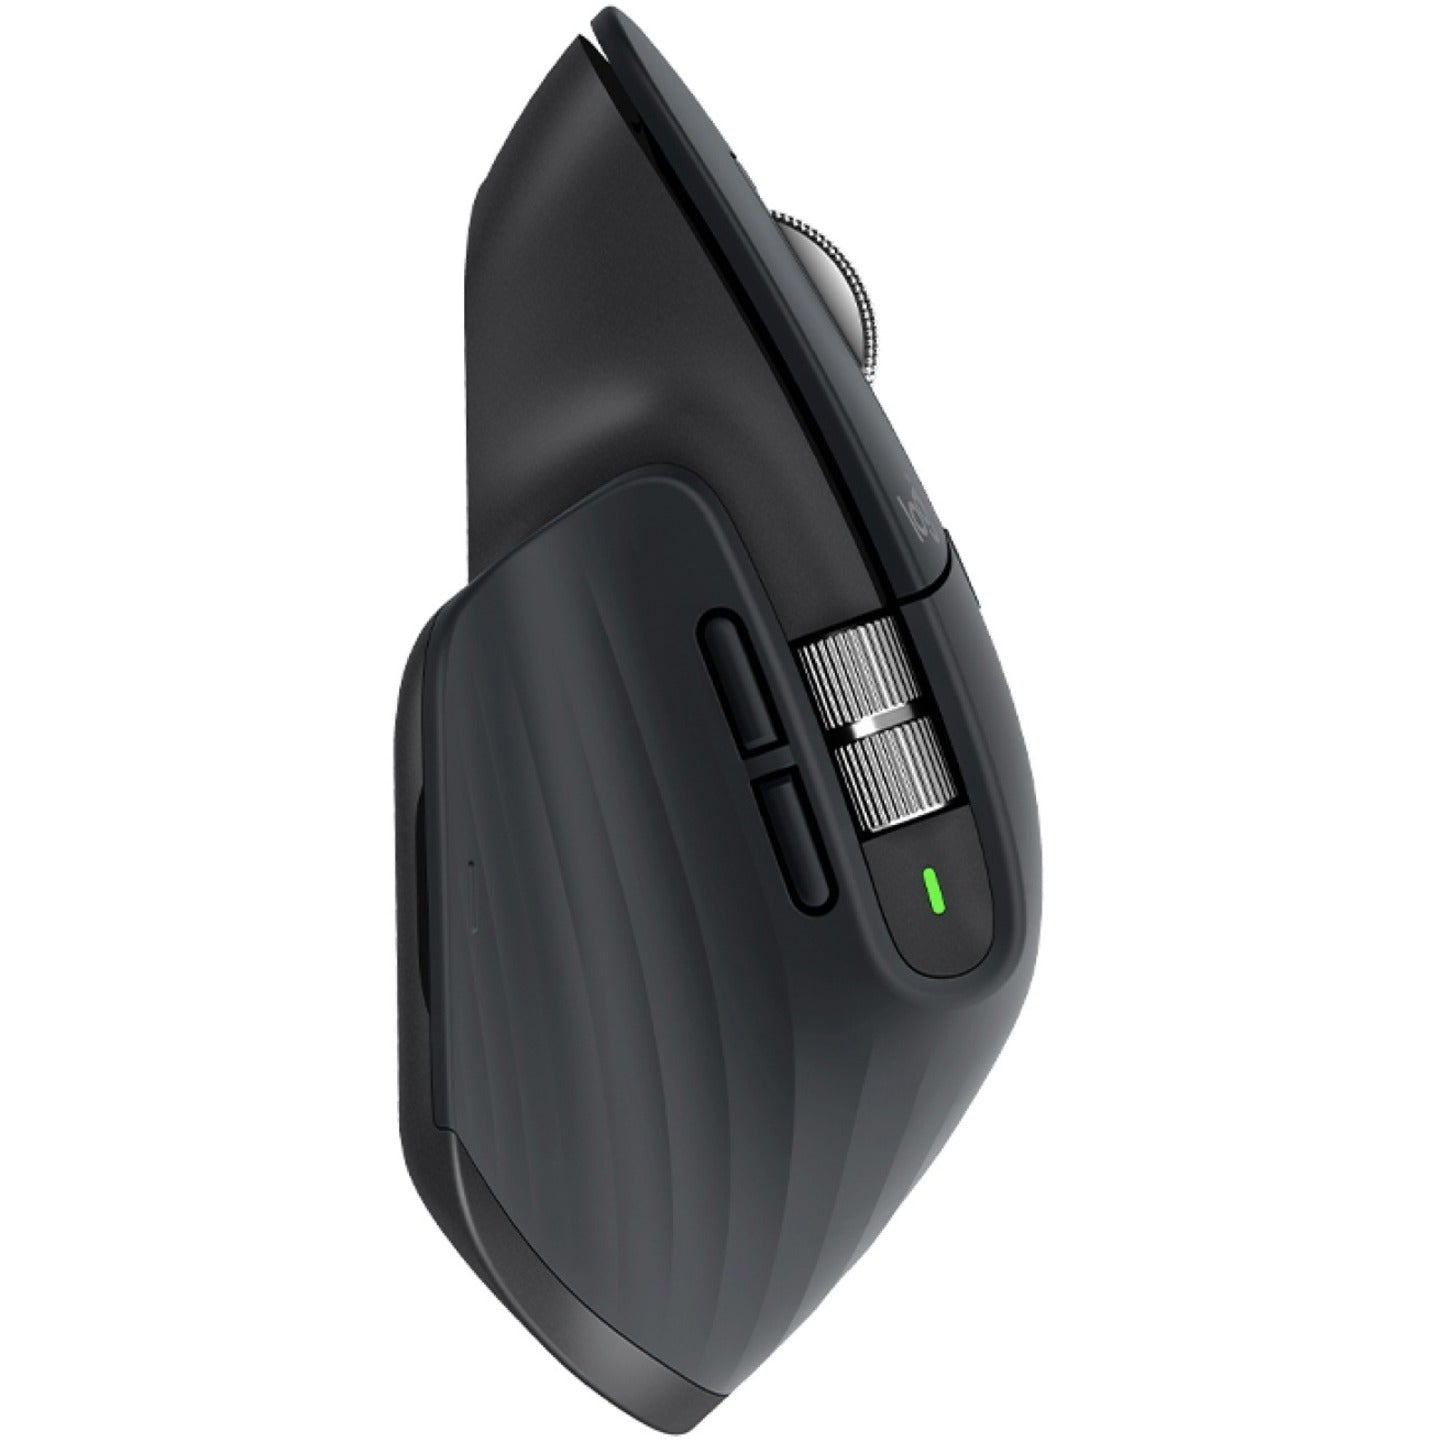 Logitech 910-006581 MX Master 3S for Business Mouse, Graphite - Rechargeable, Bluetooth, 8000 dpi, Full-size